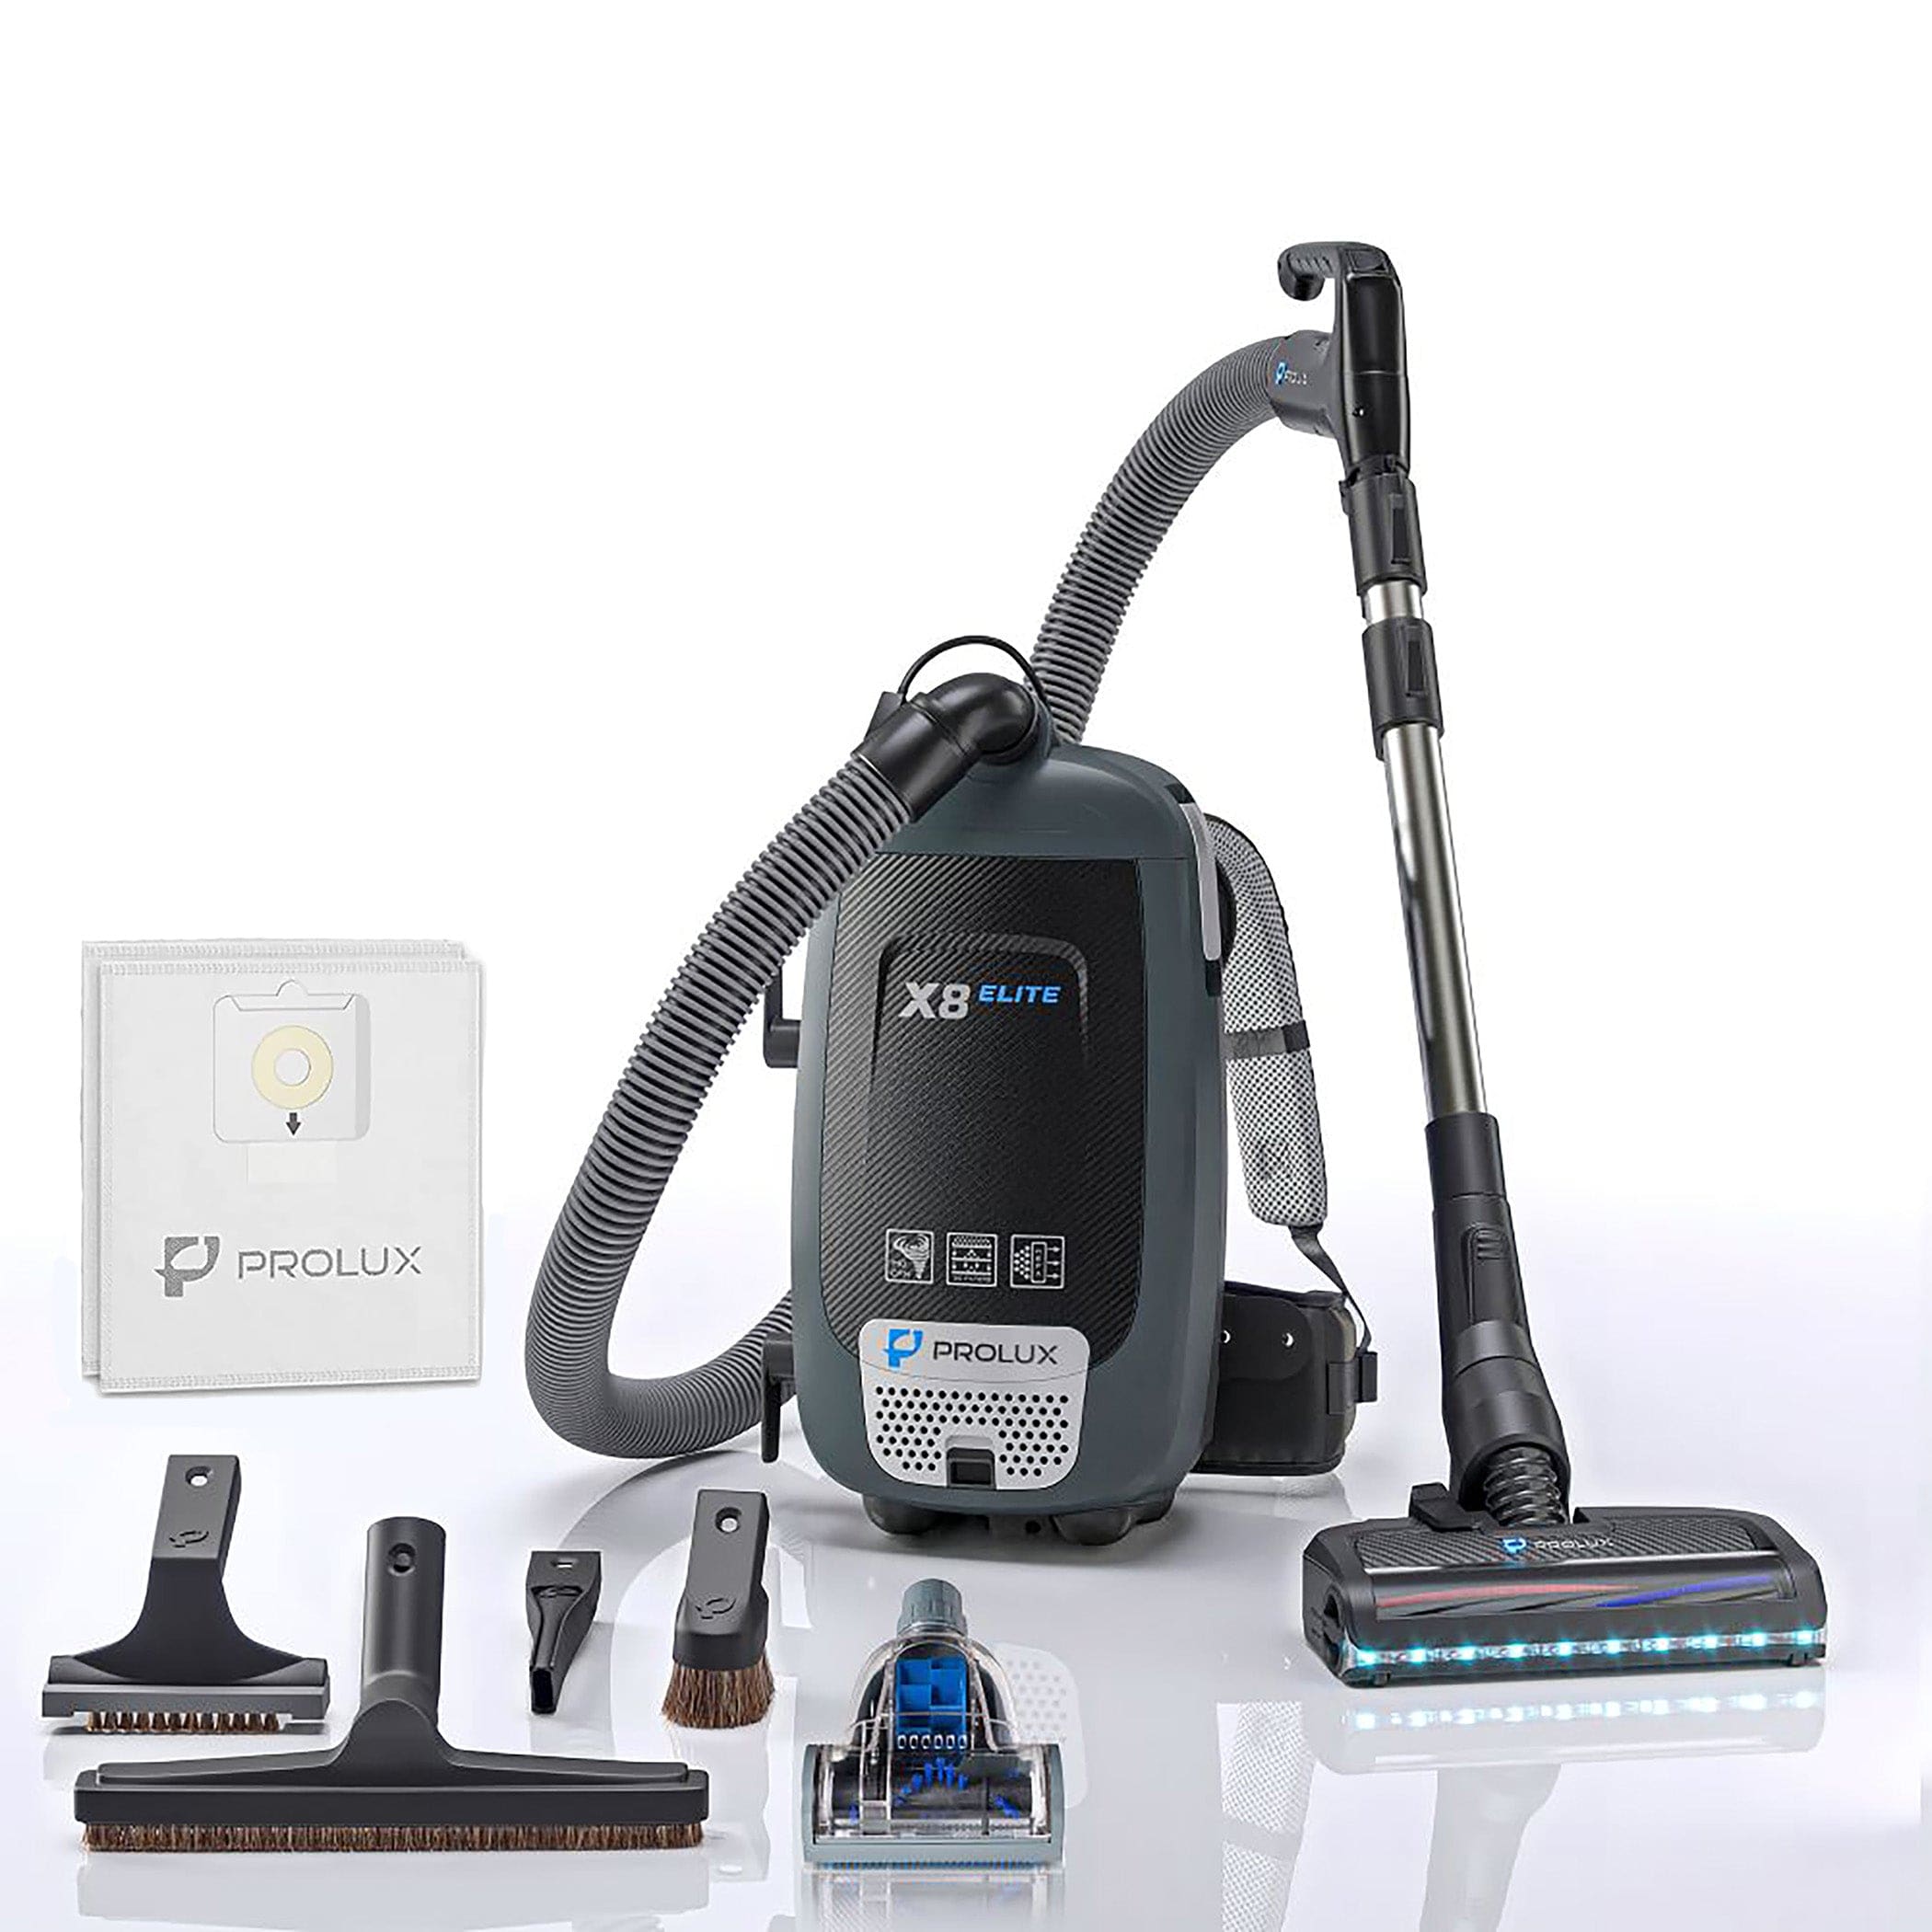 Prolux X8 Elite Backpack Vacuum Canister Cleaners